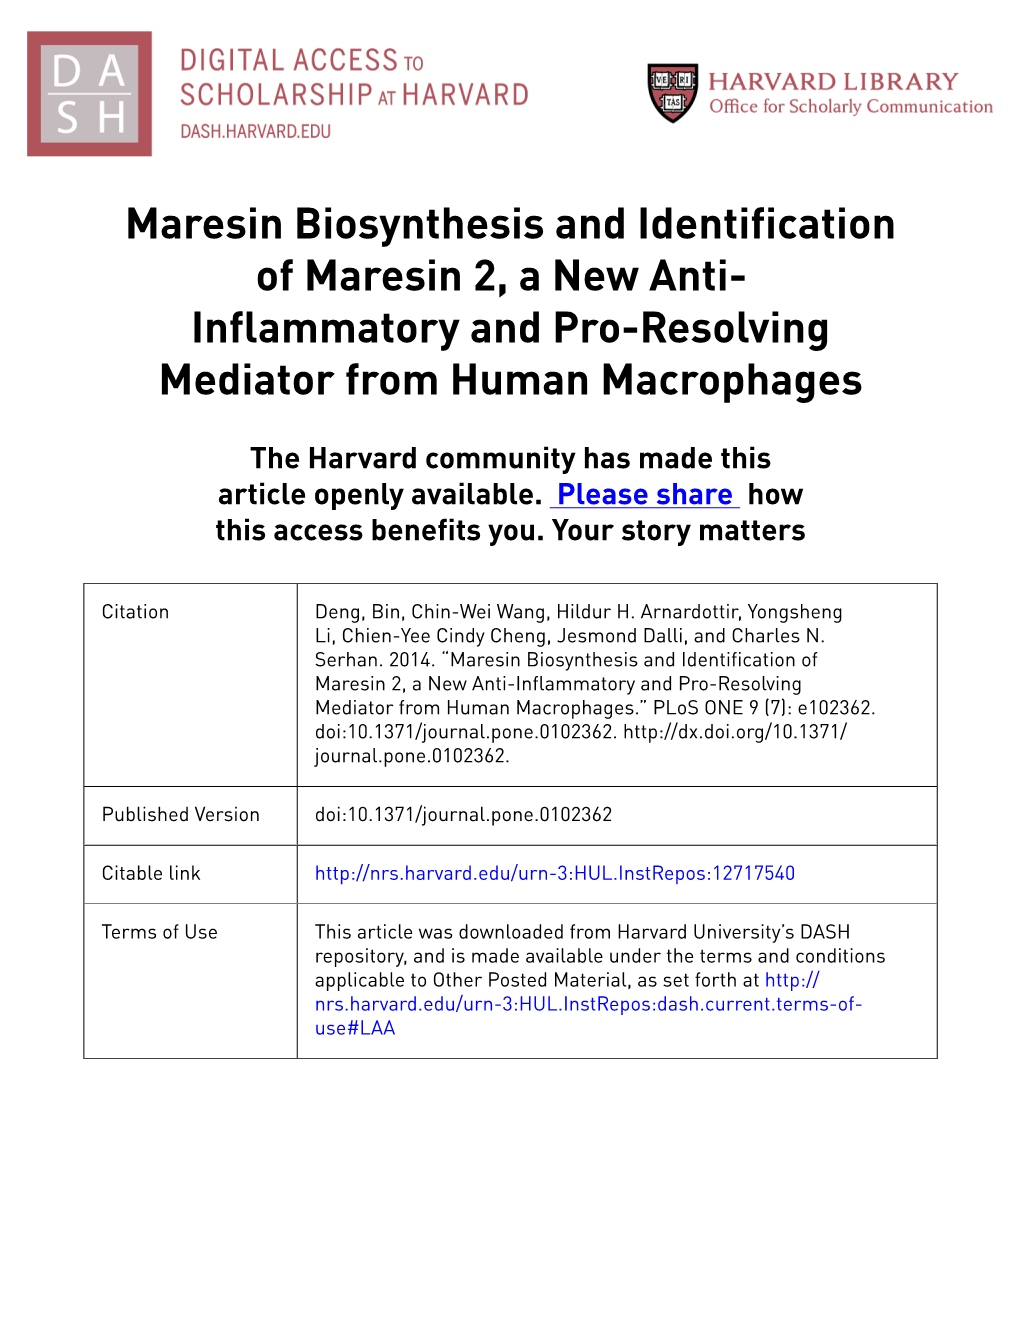 Maresin Biosynthesis and Identification of Maresin 2, a New Anti- Inflammatory and Pro-Resolving Mediator from Human Macrophages